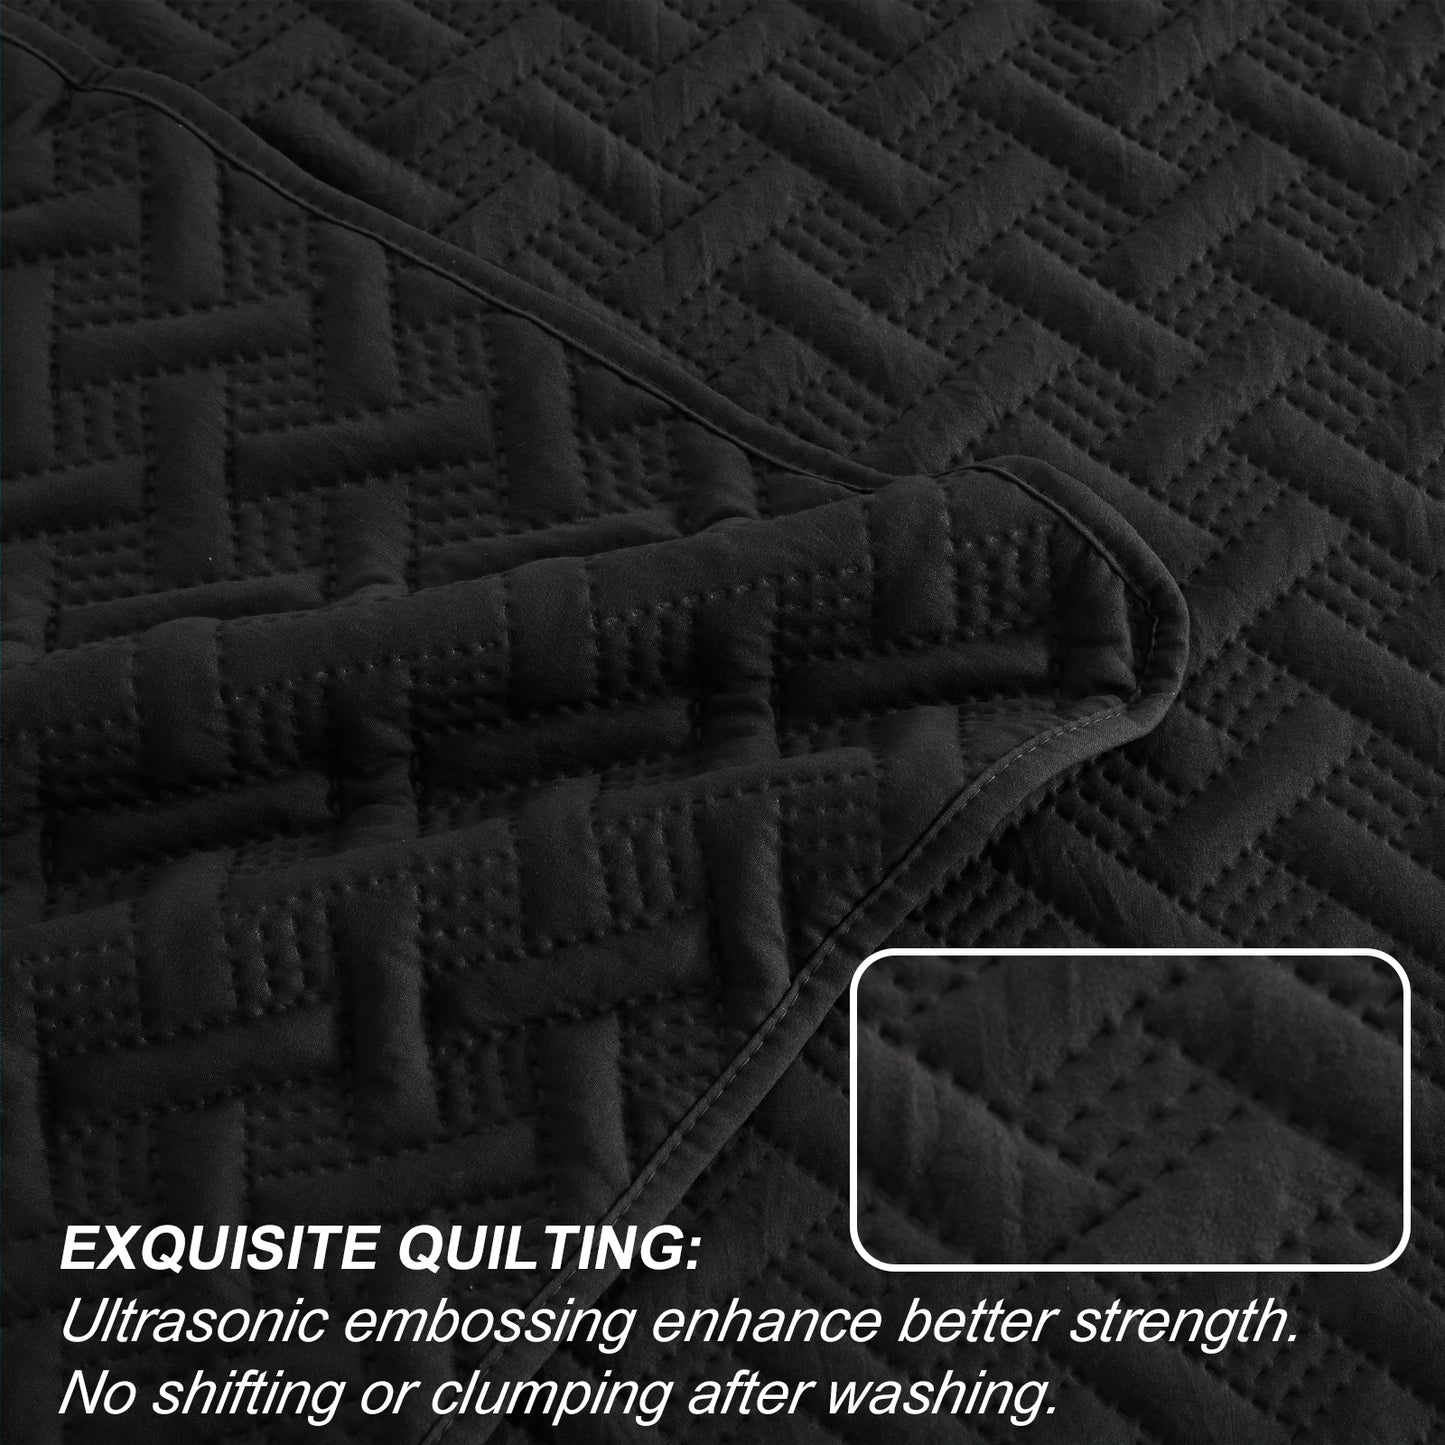 Exclusivo Mezcla 2-Piece Black Twin Size Quilt Set, Weave Pattern Ultrasonic Lightweight and Soft Quilts/Bedspreads/Coverlets/Bedding Set (1 Quilt, 1 Pillow Sham) for All Seasons